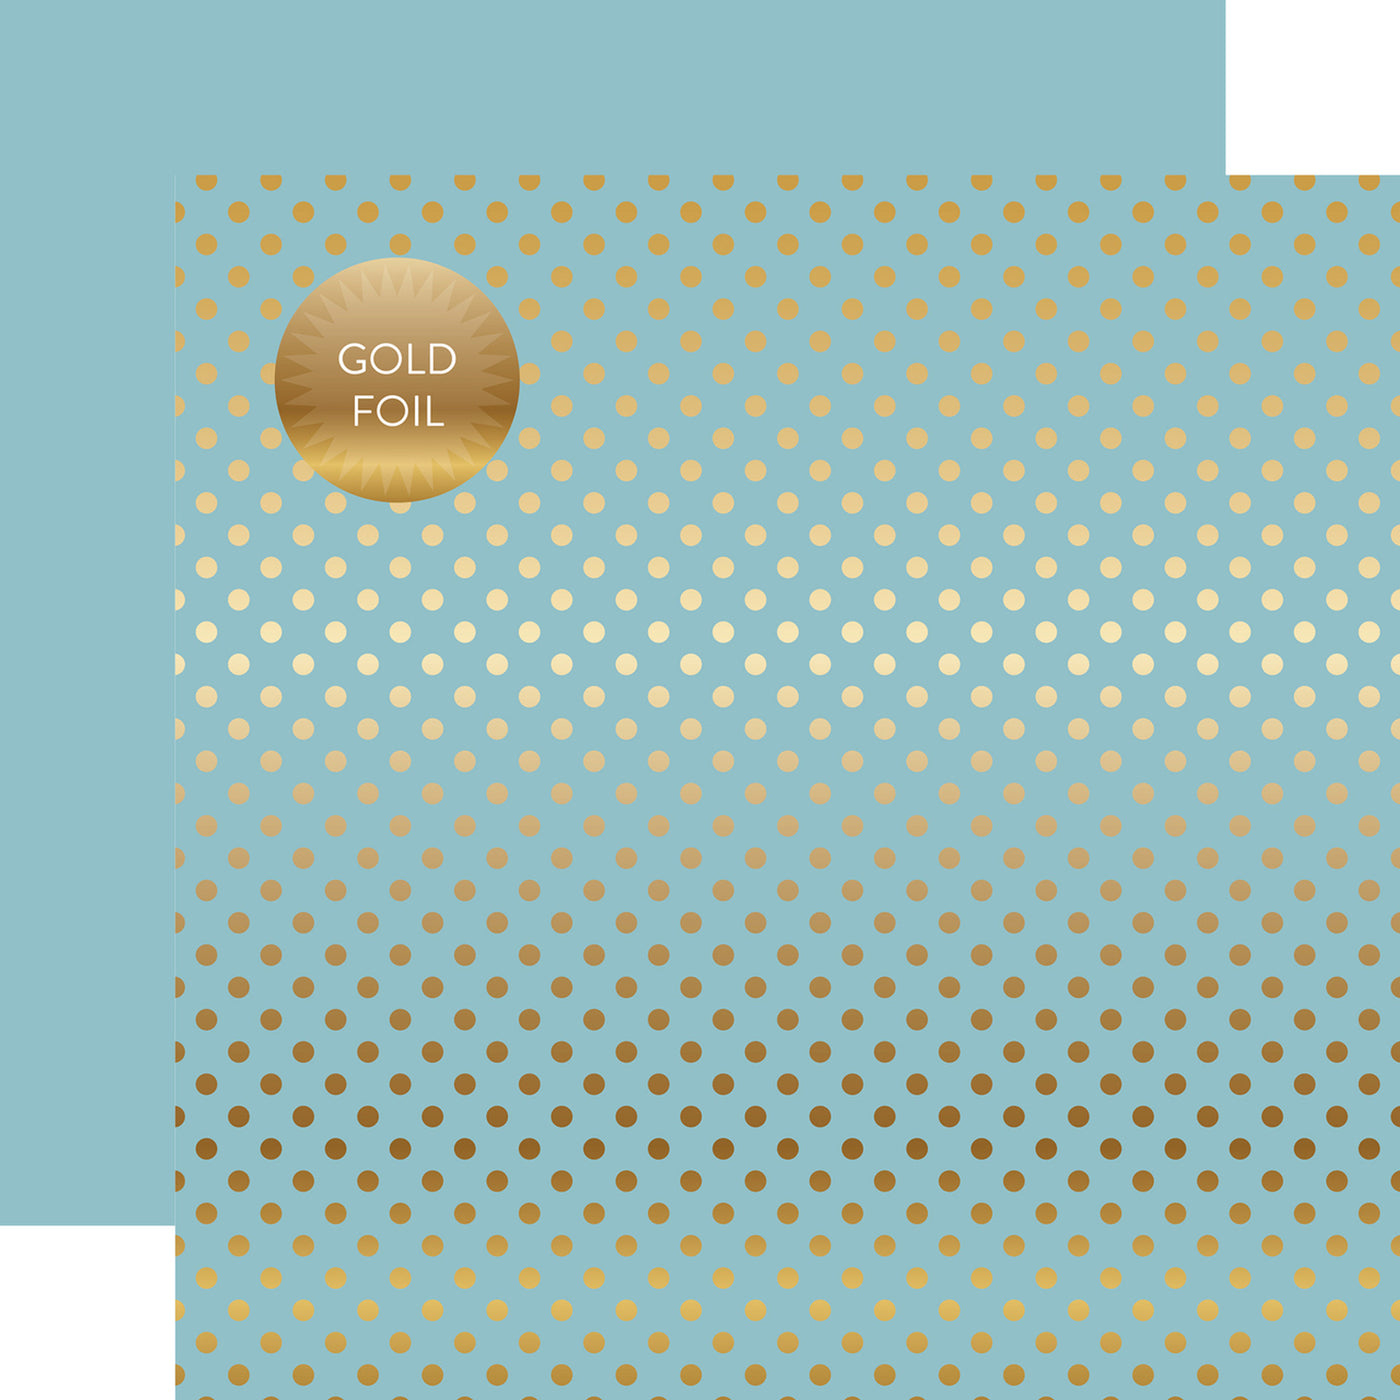 Gold foil dots on light blue 12x12 cardstock, plain light blue reverse, from Dots & Stripes Collection by Echo Park Paper.